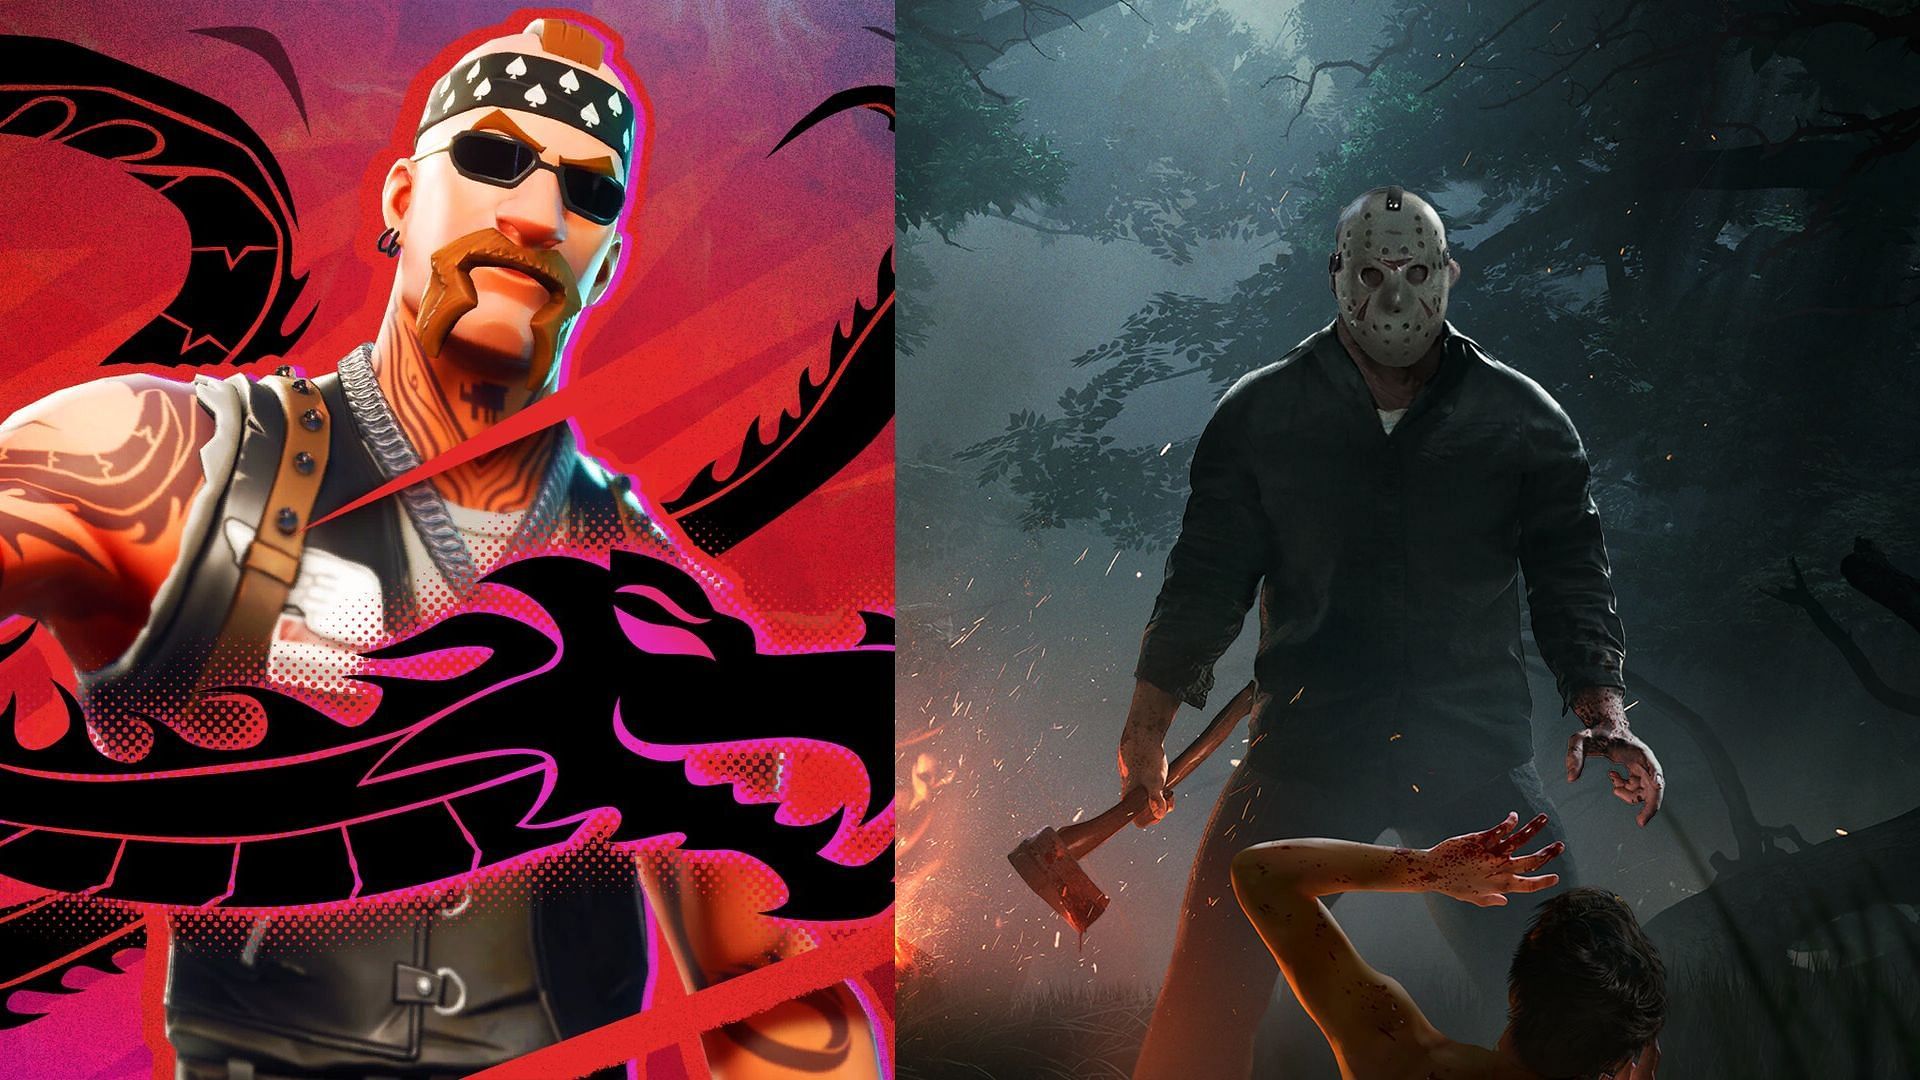 Rumor: Fortnite x Friday The 13th collaboration could be in development 